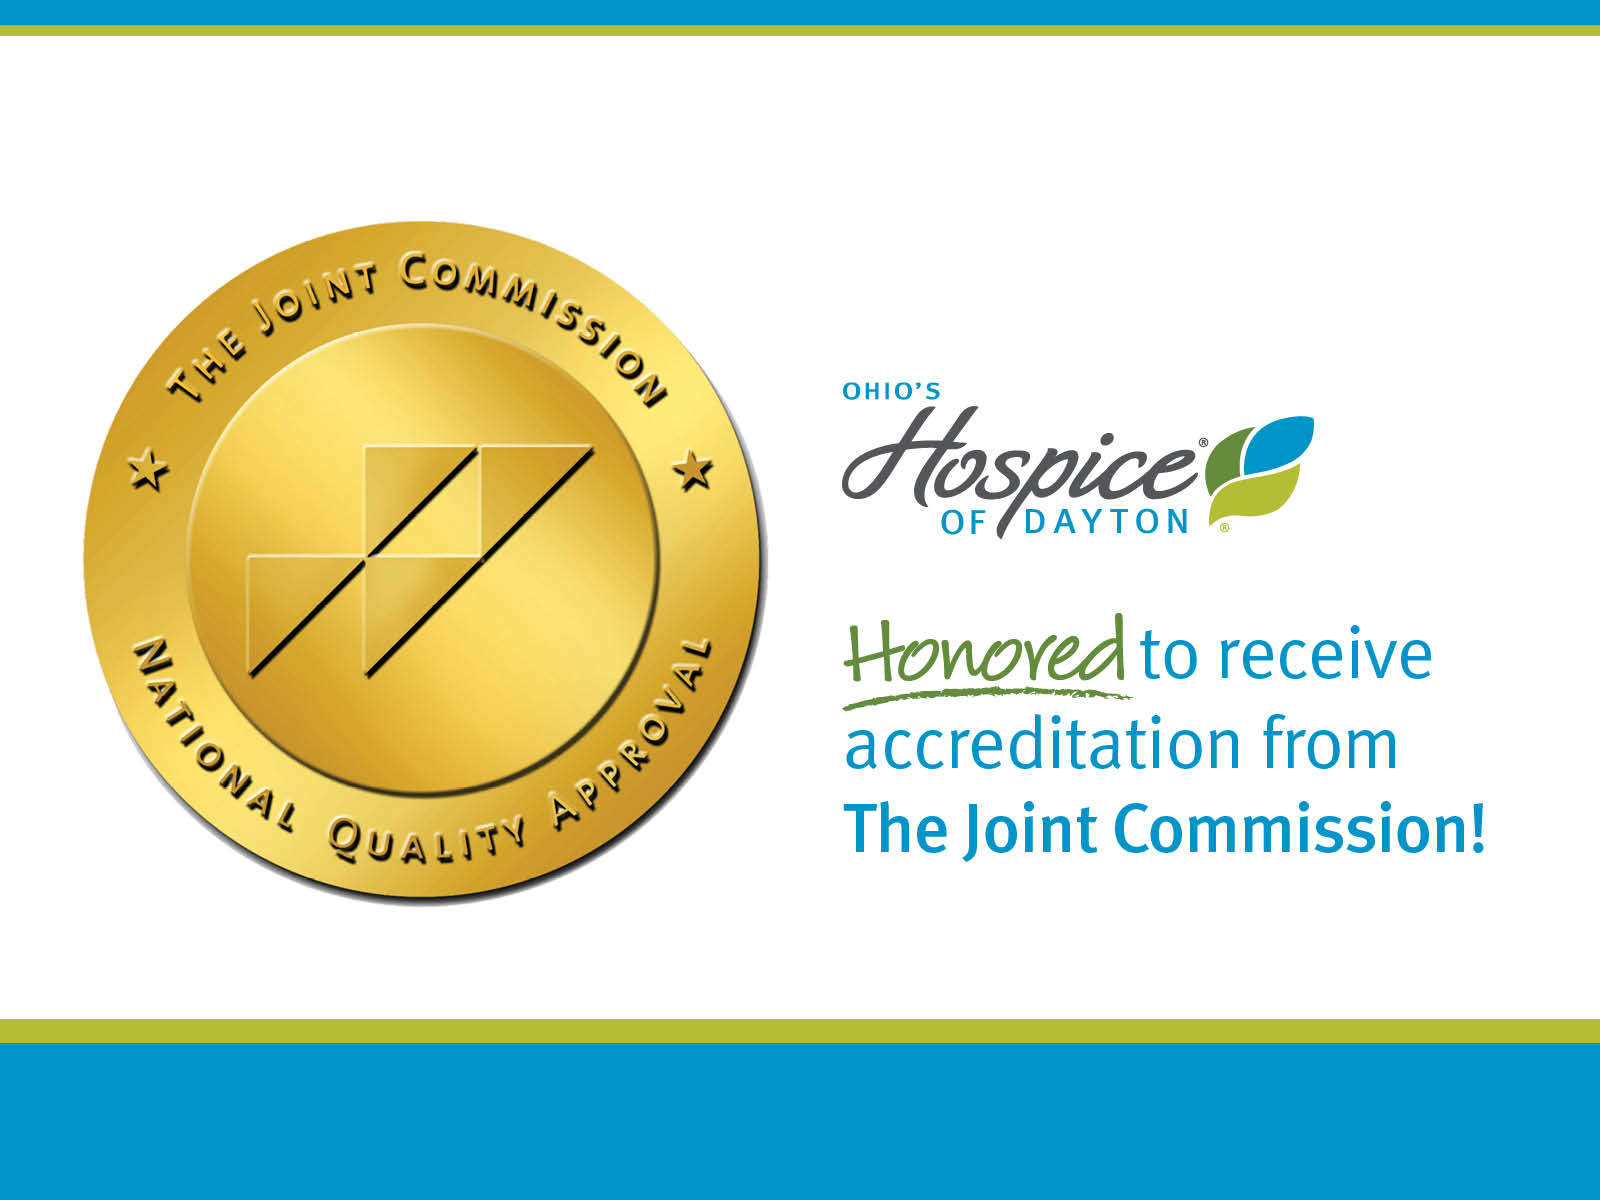 Ohio's Hospice of Dayton is honored to receive accreditation from The Joint Commission!